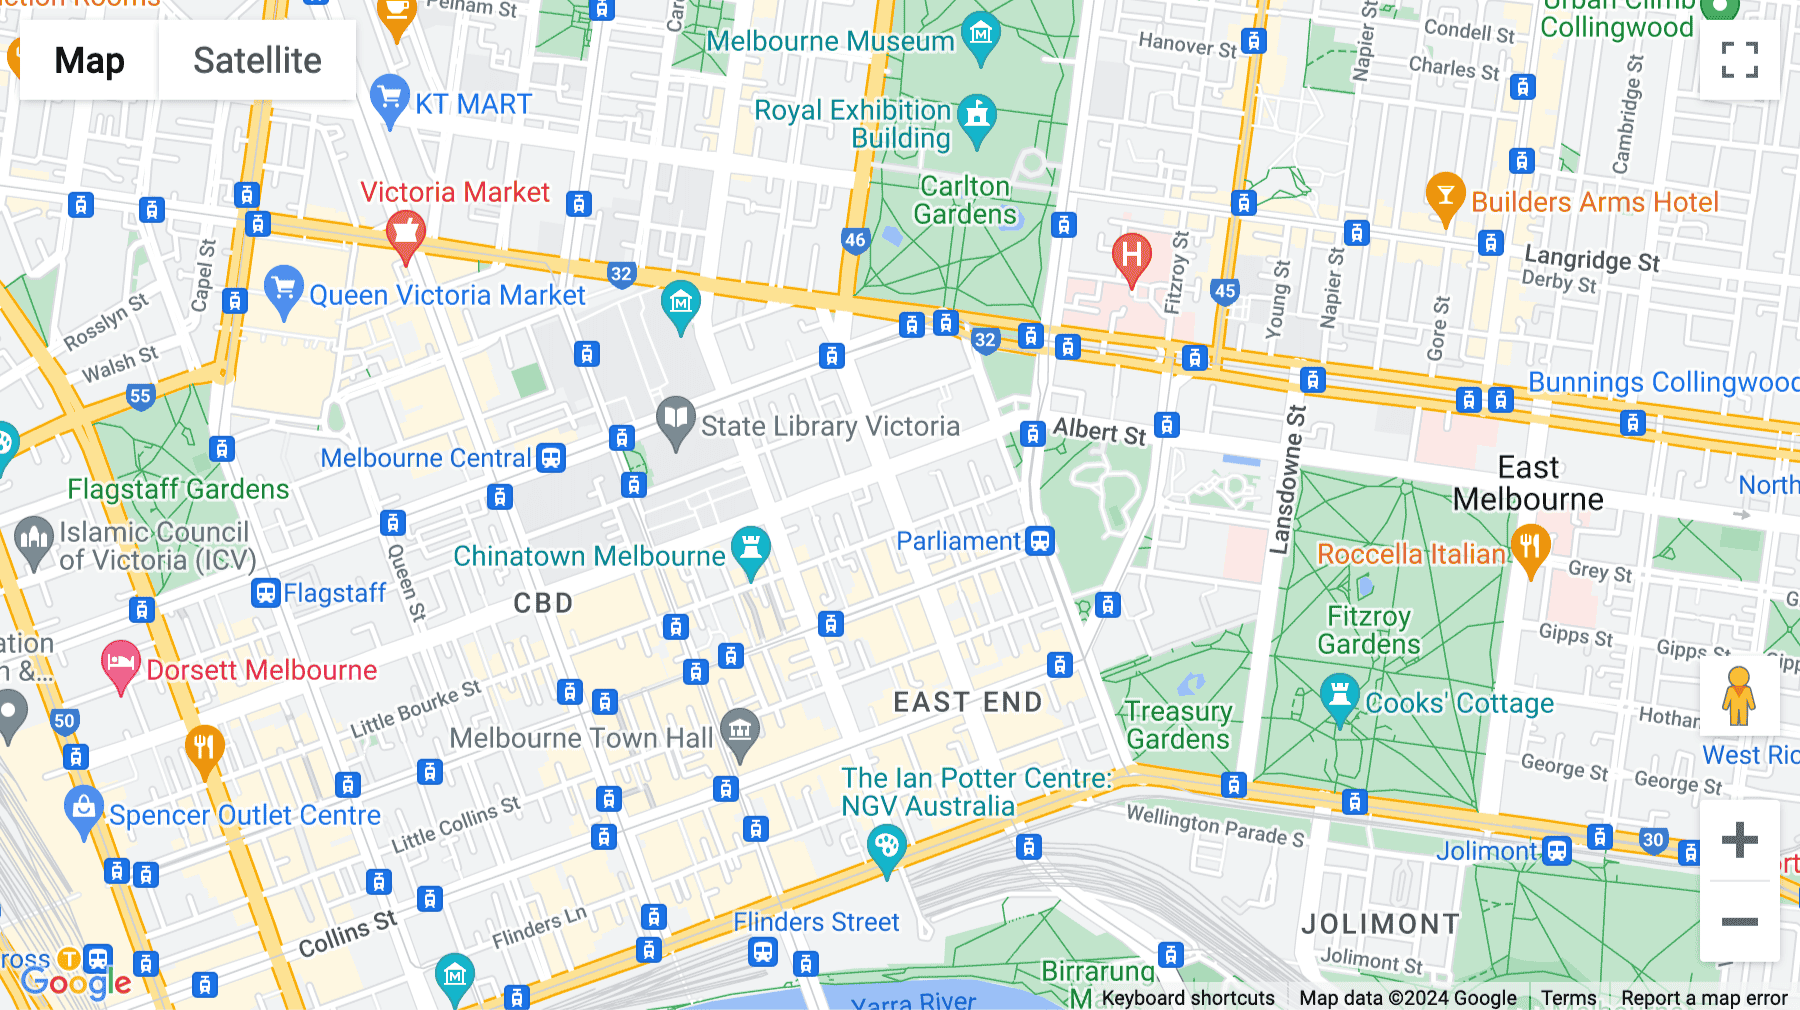 Click for interative map of 222 Exhibition Street, Melbourne, Melbourne